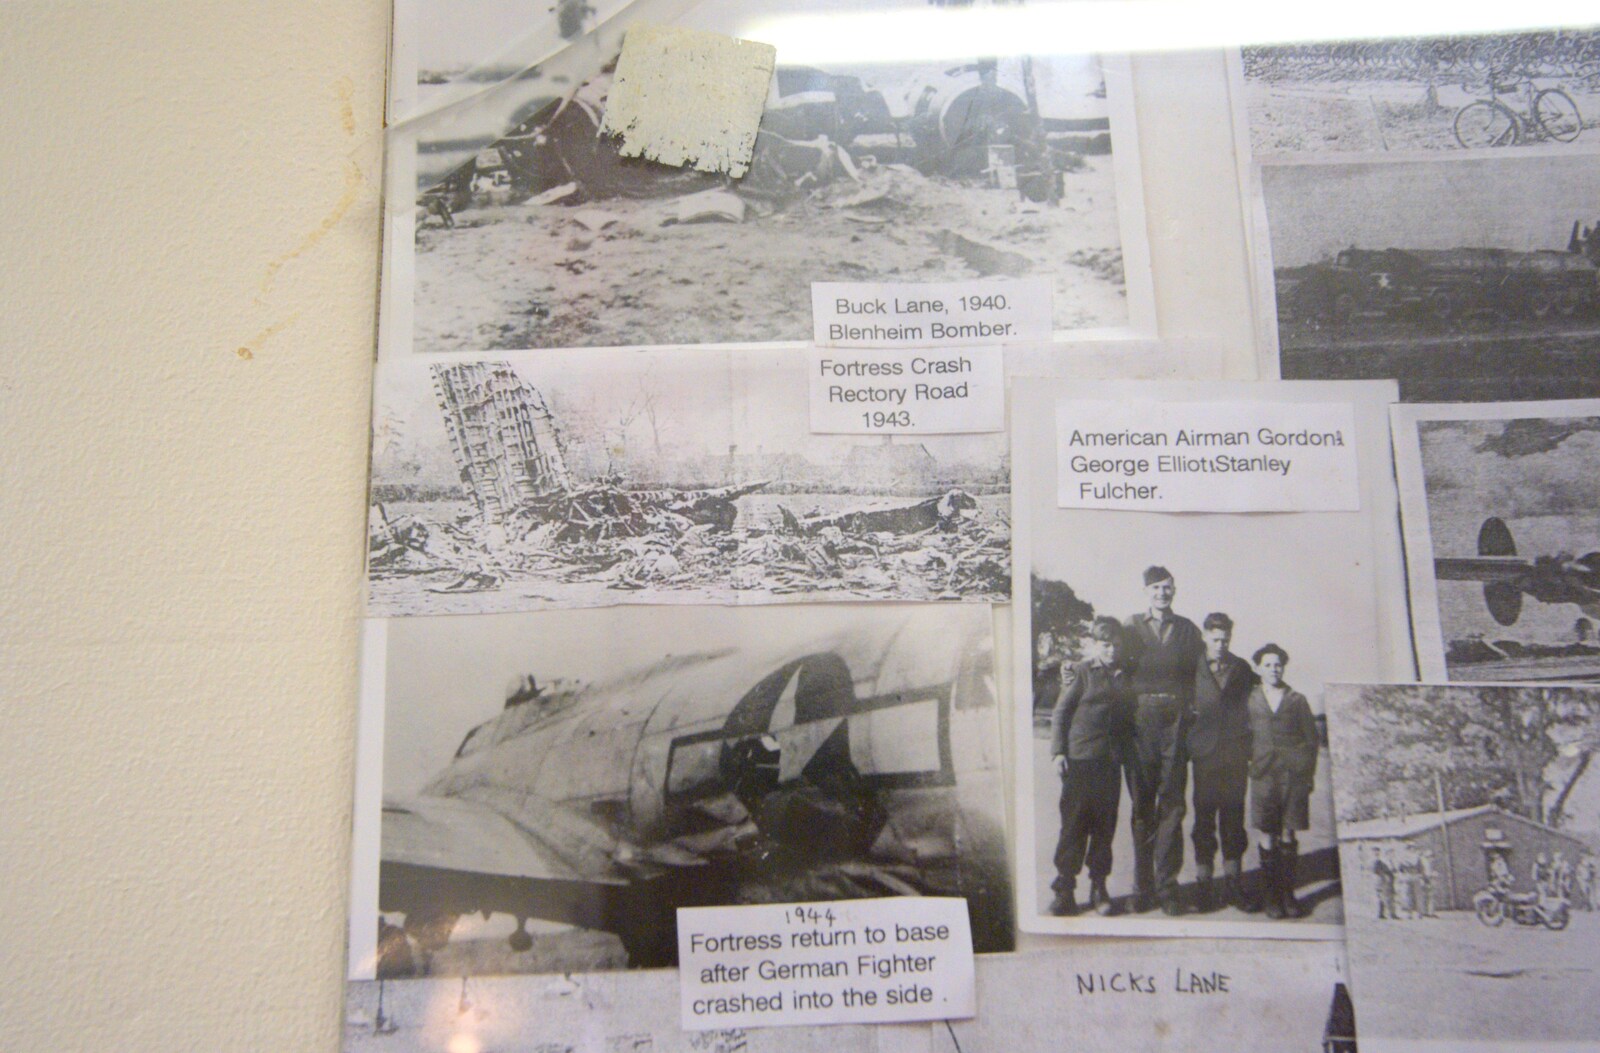 A photo of the B-17 crash in 1943 from Charles and the Royal Wedding, Brome, Suffolk - 24th April 2011